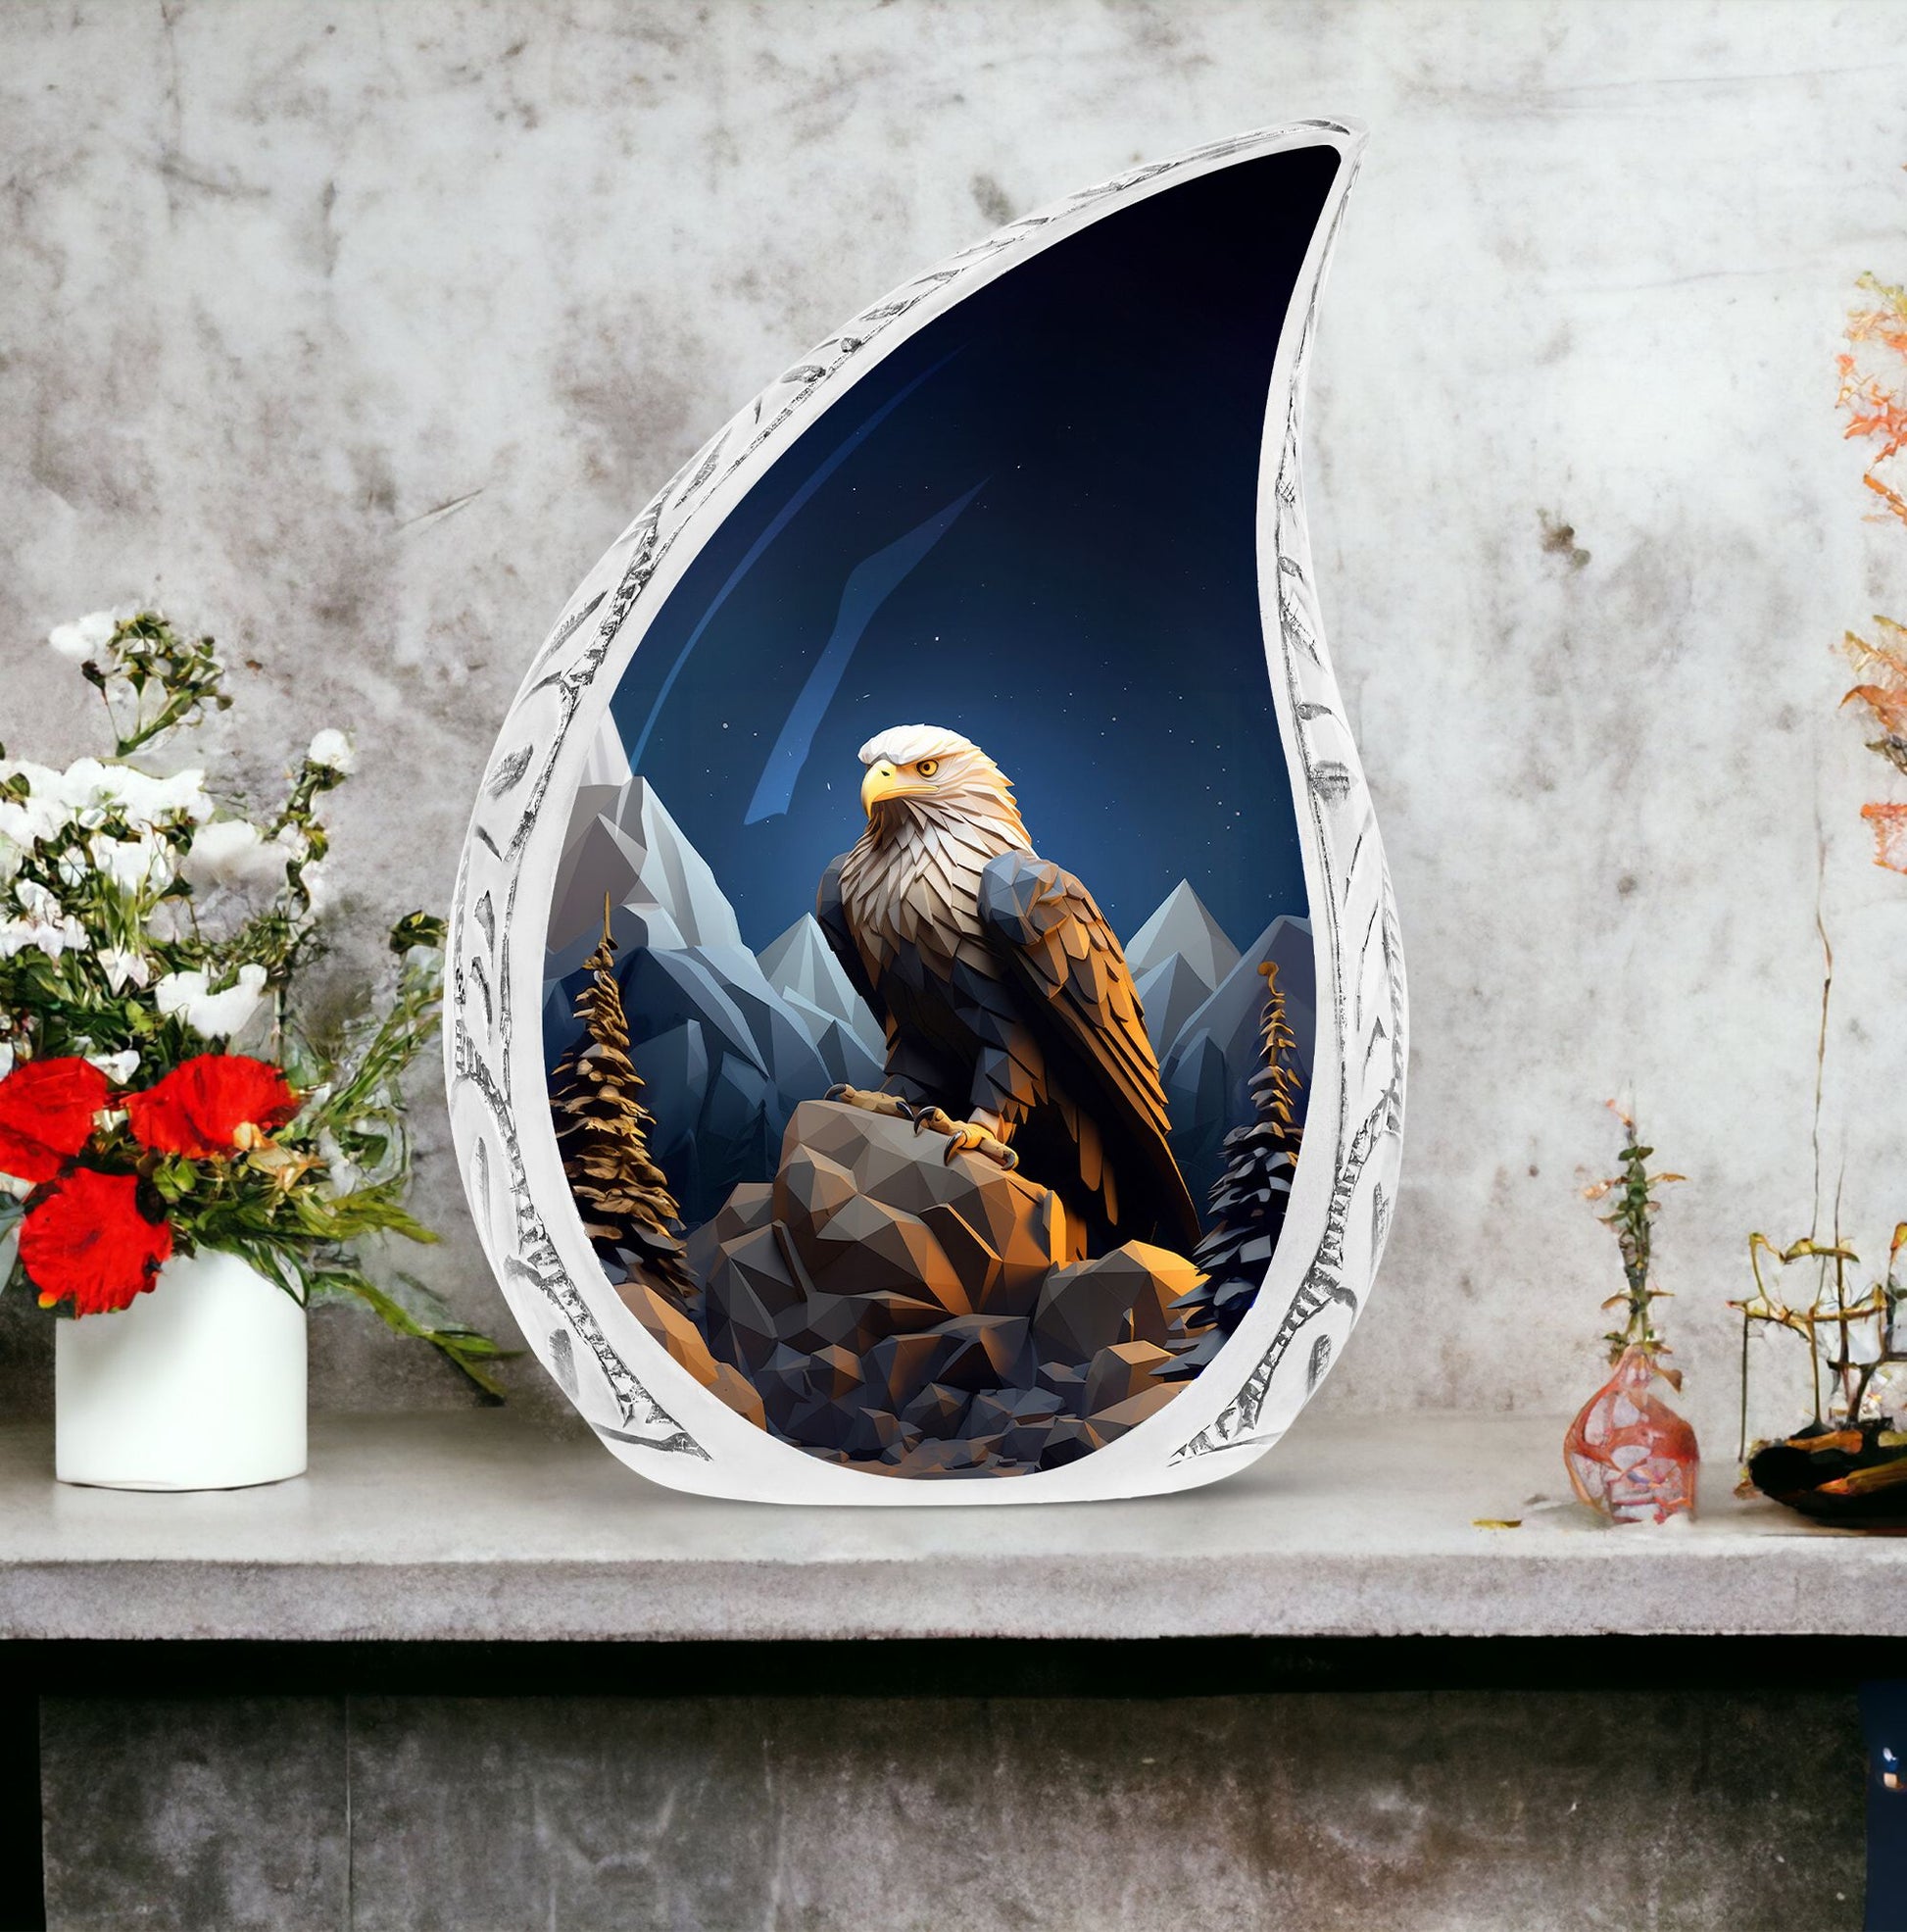 An eagle soaring over mountains designed on majestic large urn for storing adult human ashes, an unique funeral decoration